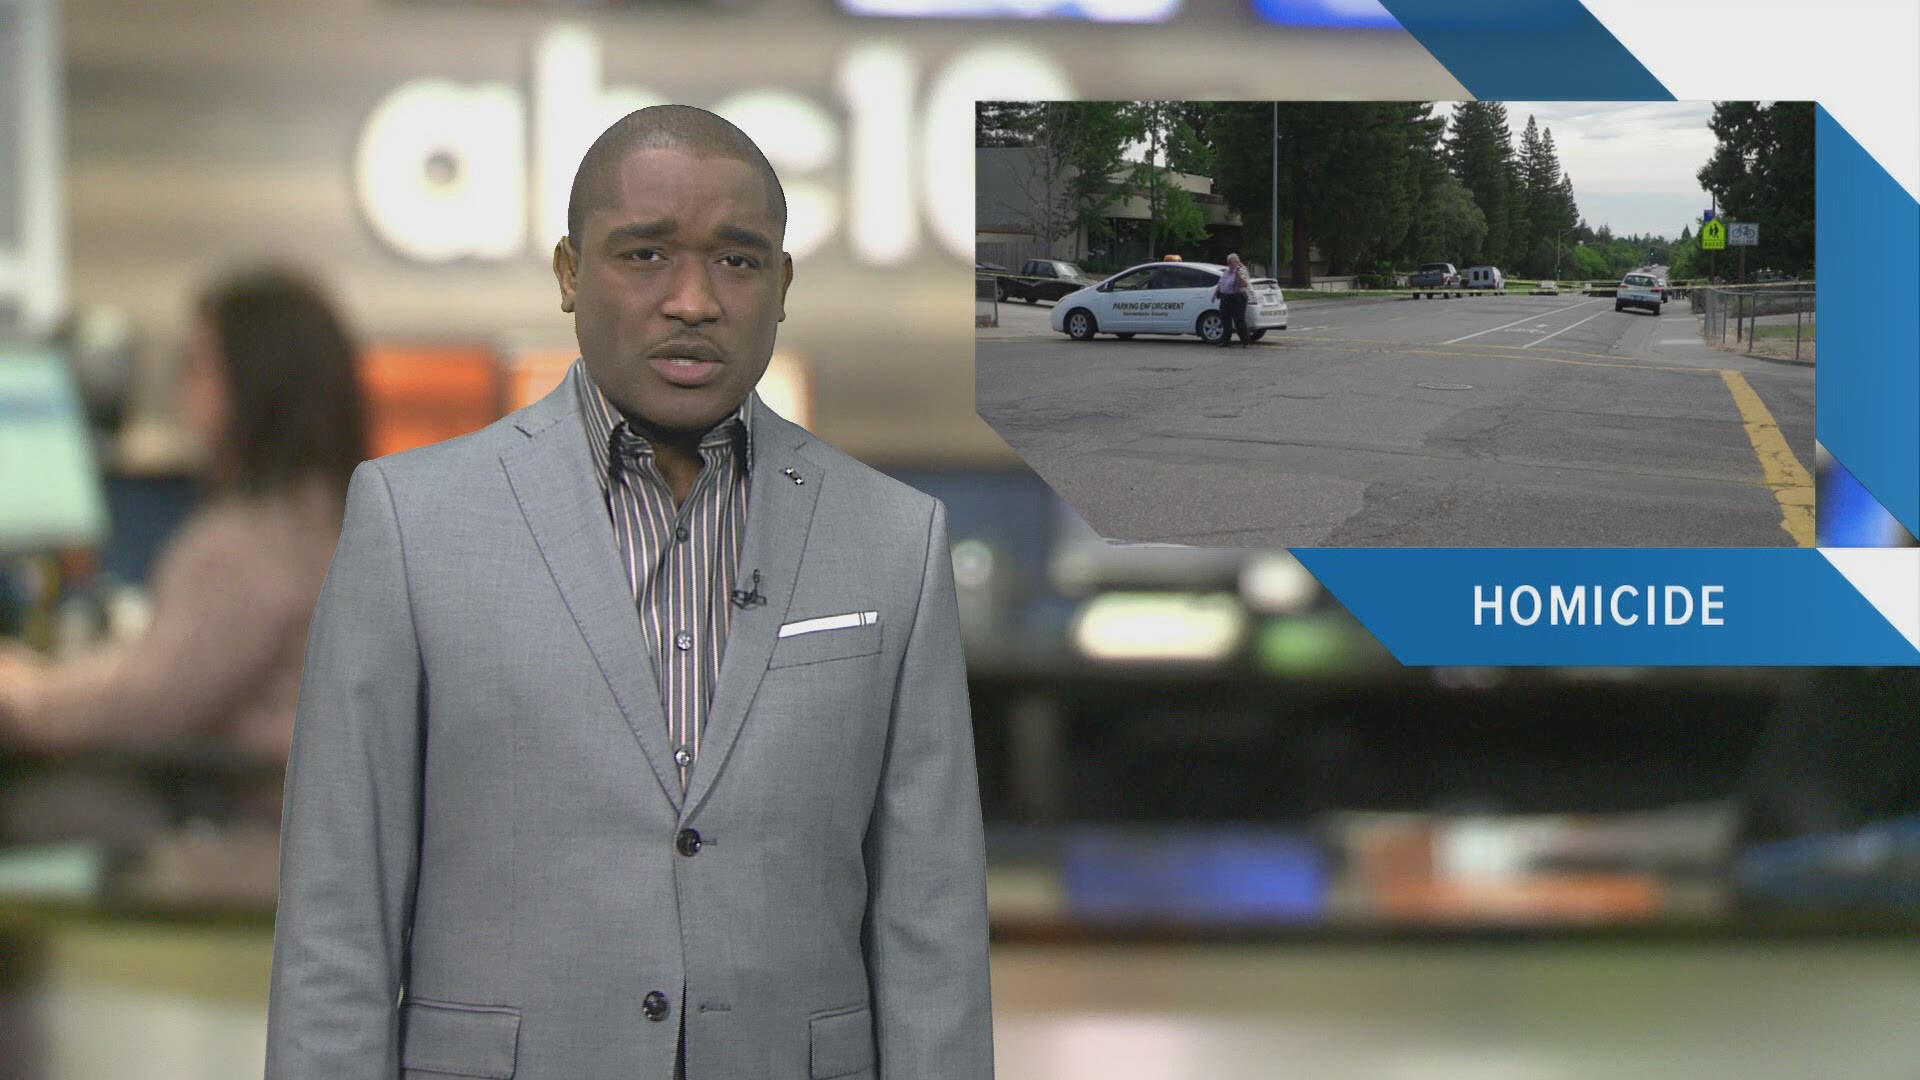 Evening Headlines: June 28, 2019 | Catch in-depth reporting on #LateNewsTonight at 11 p.m. | The latest Sacramento news is always at www.abc10.com